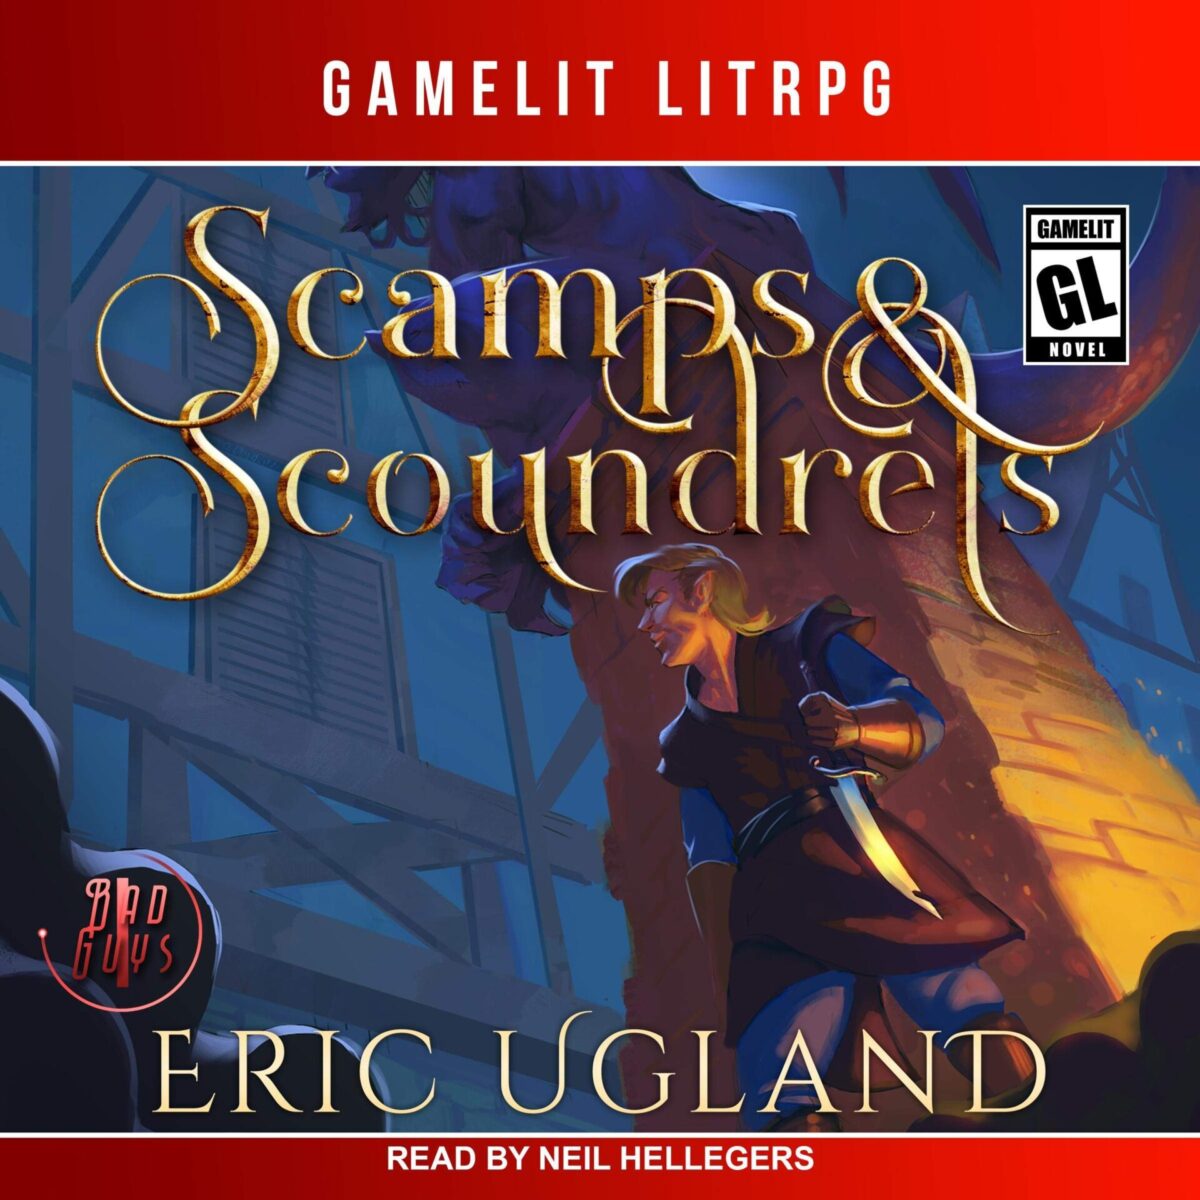 [1] Scamps & Scoundrels꞉ Bad Guys, Book 1